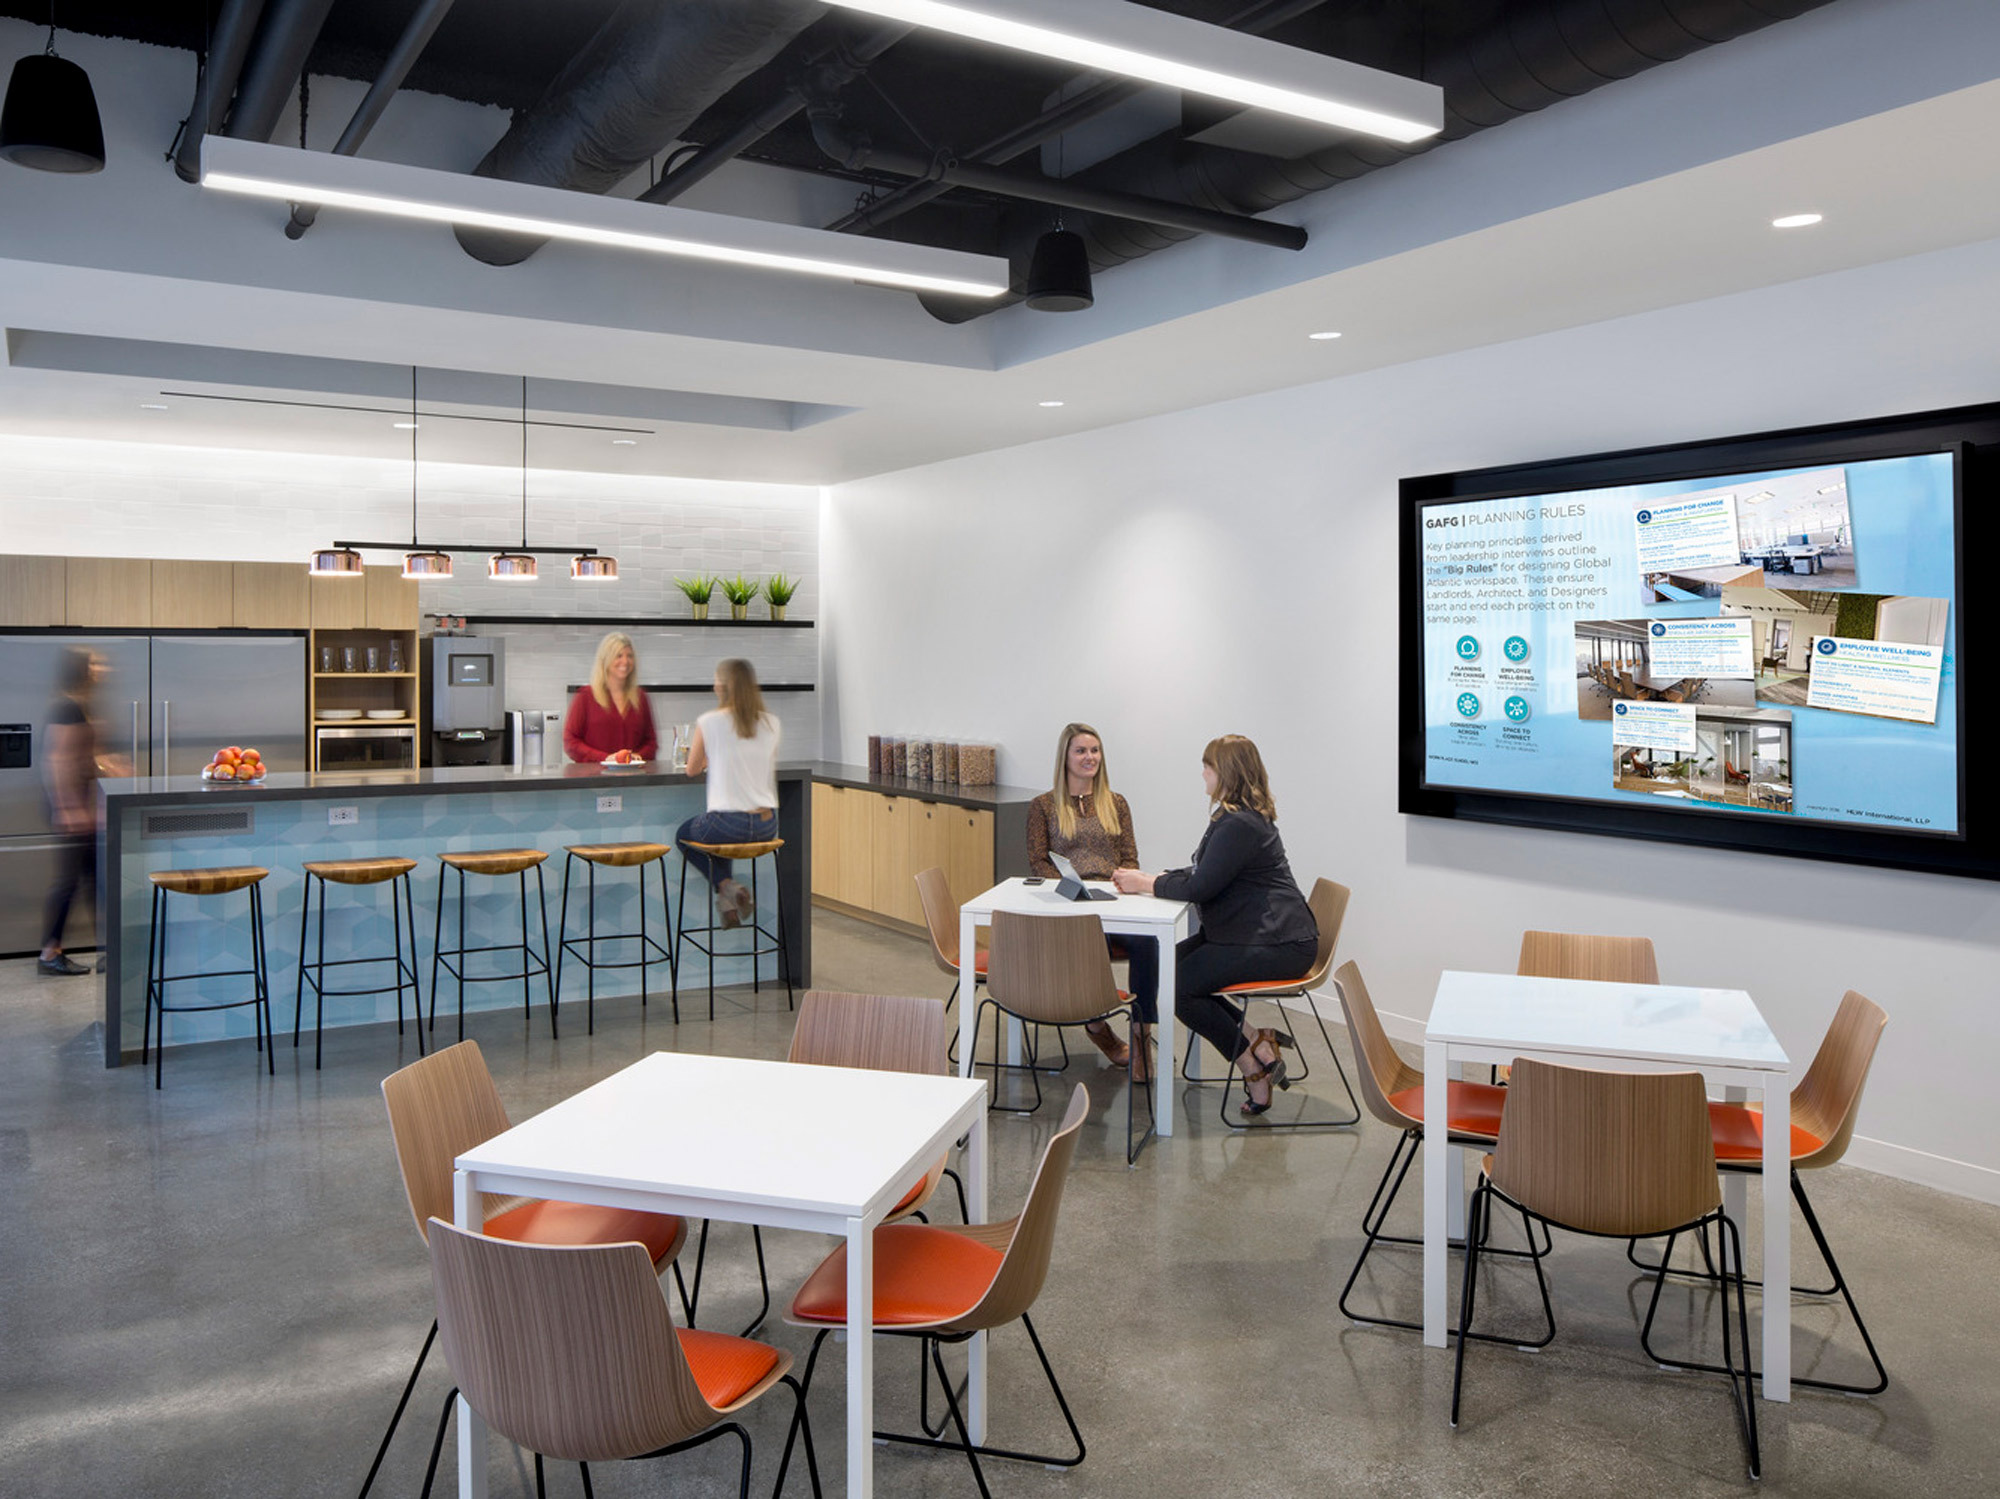 Modern office break room featuring sleek, two-tone kitchen cabinetry and bar-seating area with orange stools. An interactive digital display presents information, while employees engage in casual conversation around tables with white chairs. The space combines functionality with a stimulating color palette for collaborative work.